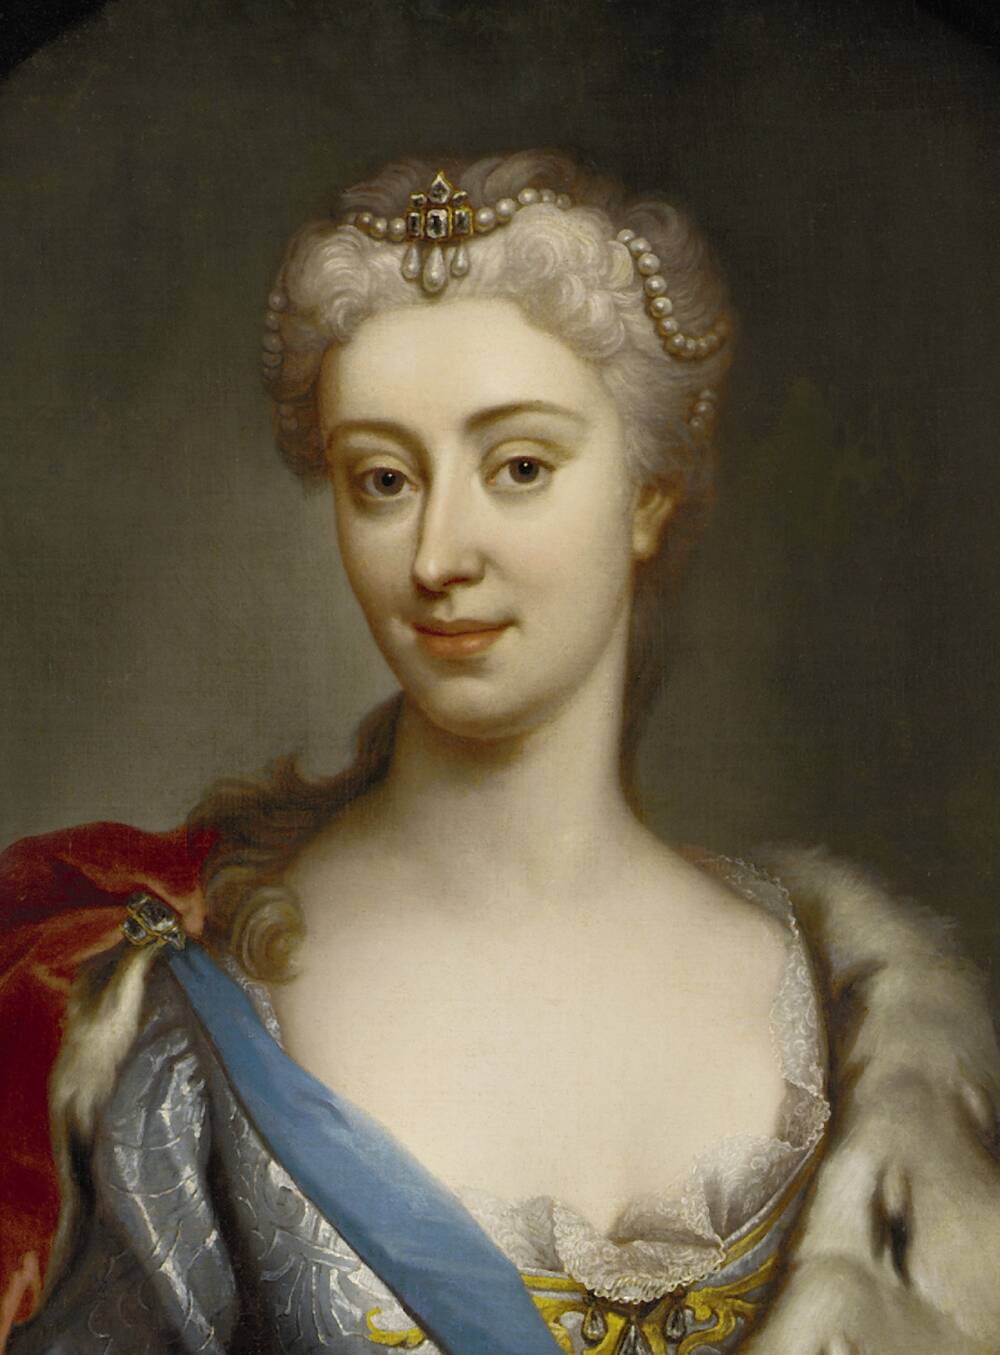 A half portrait of a young, very rich 18th-century woman. Her hair is neatly tied back and adorned with a pearl headband. She wears a low-cut silk dress with a fur-lined cape around her shoulders, attached to a blue sash.